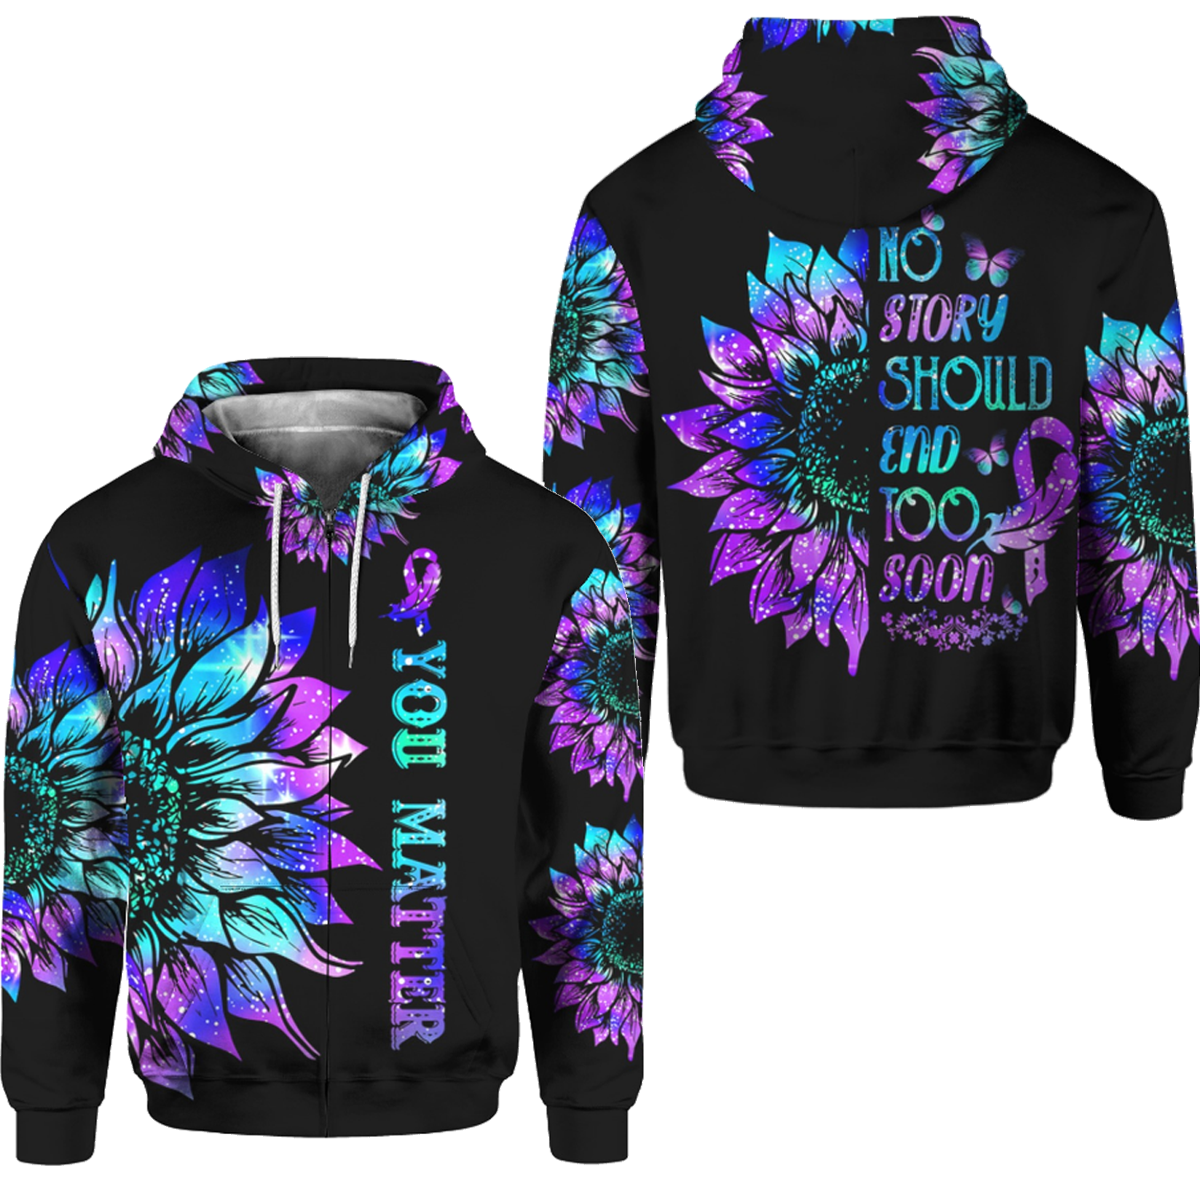 No Story Should End Too Soon You Matter Suicide Prevention Awareness 3D zip hoodie